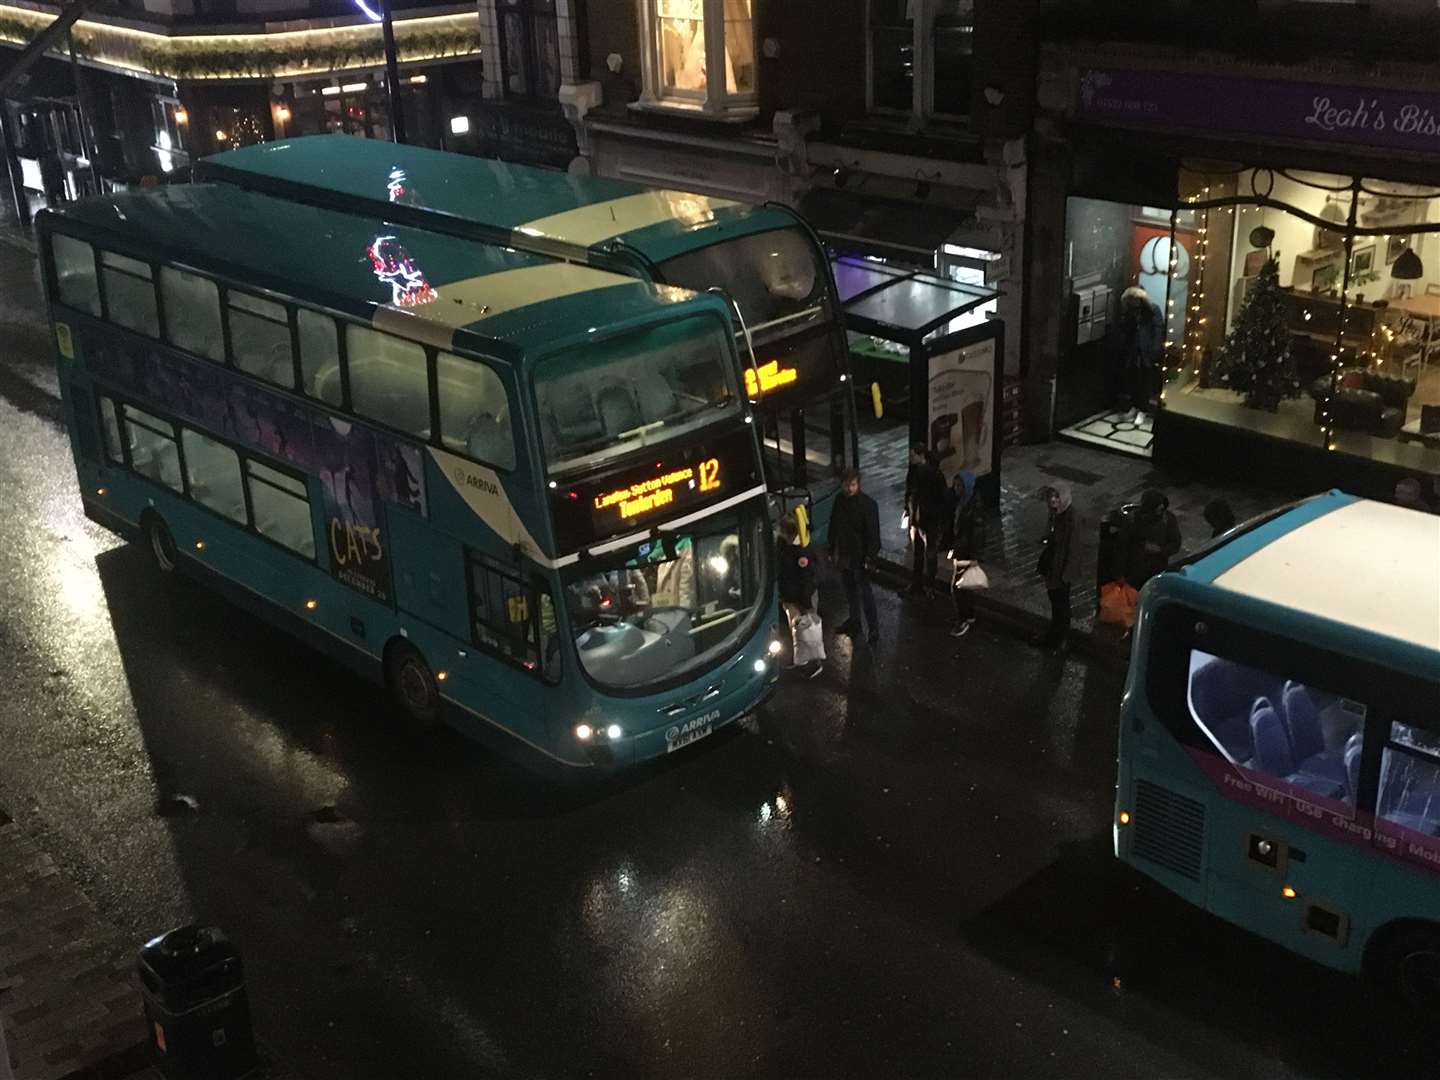 The number12 bus pulls into Maidstone High Street